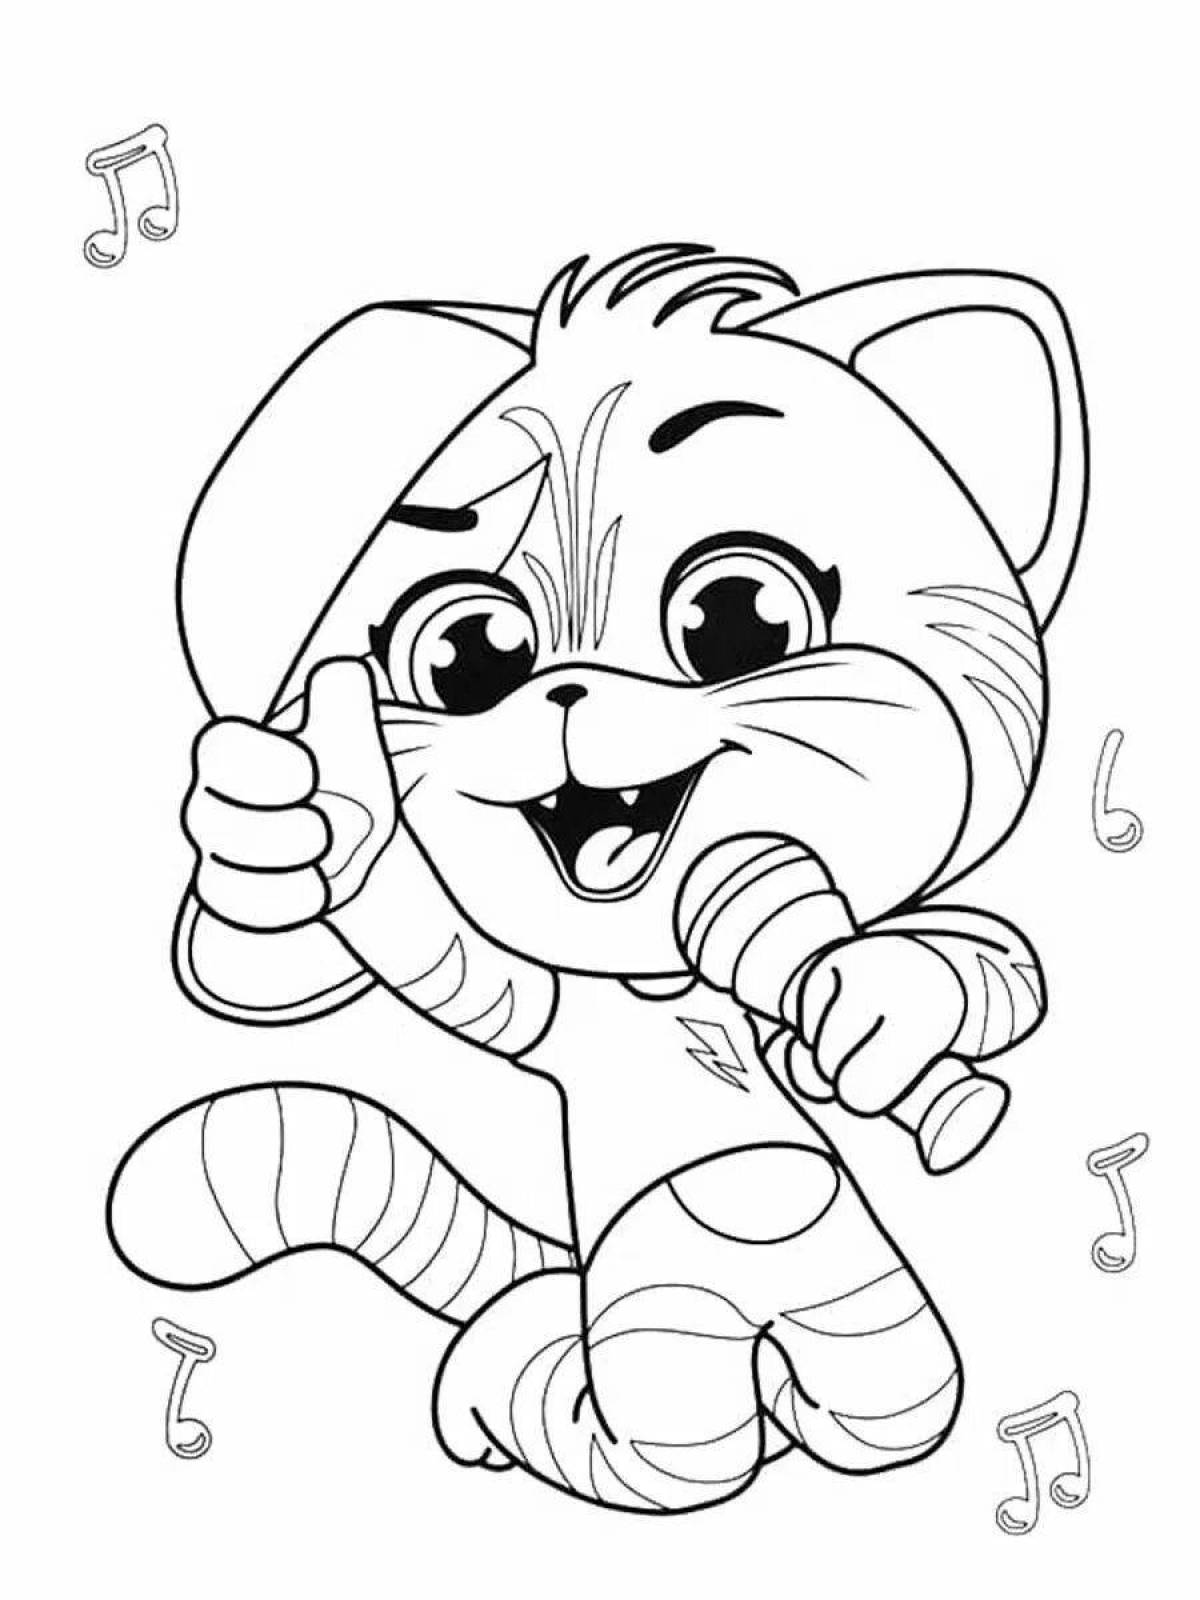 Milady 44 kittens coloring page